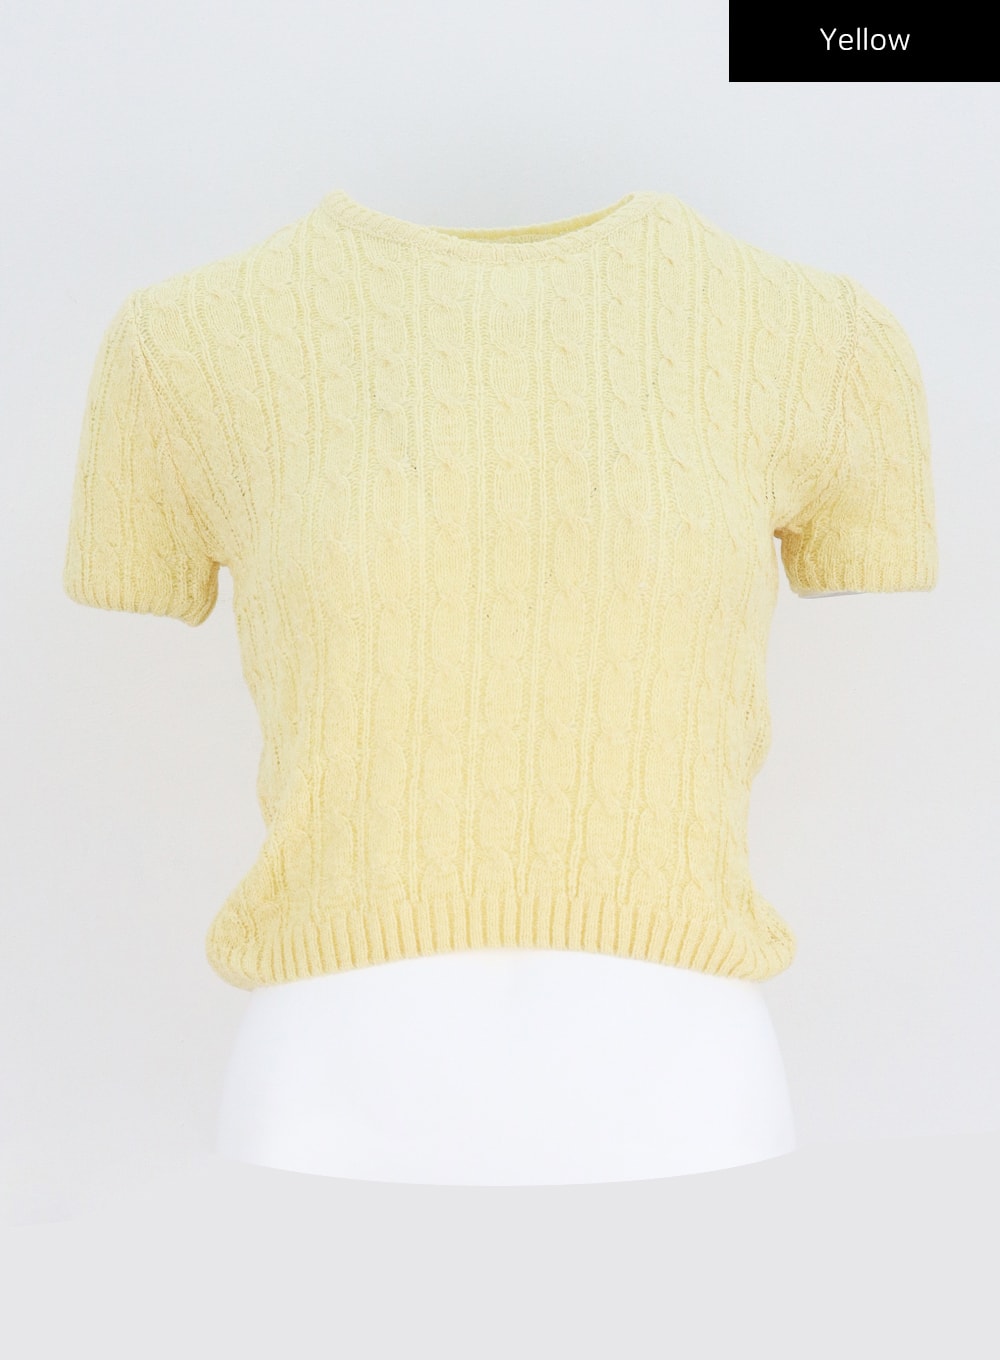 cable-knit-summer-sweater-by322